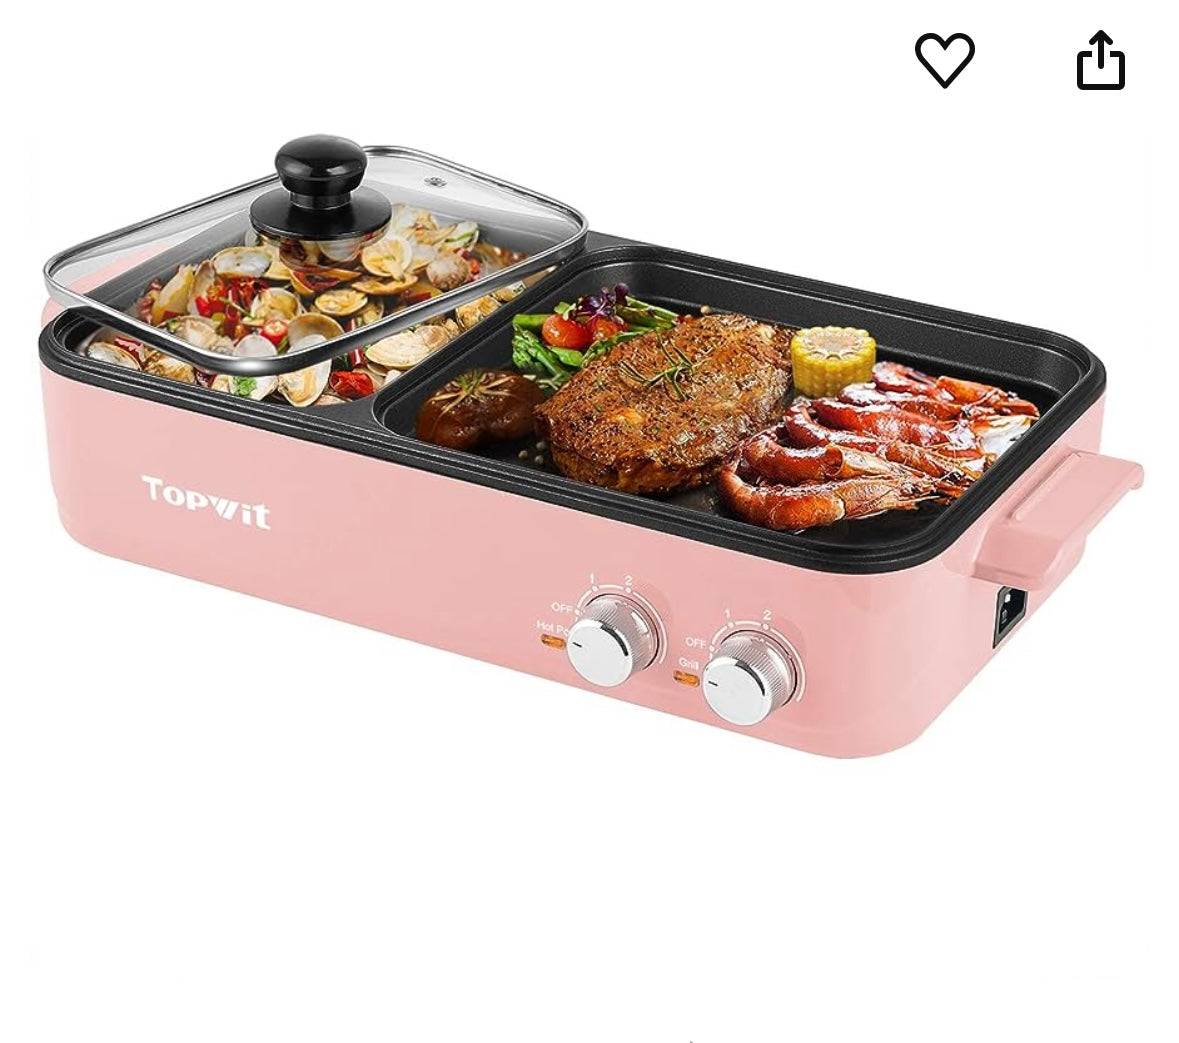 Hot Pot with Grill for Steak 100% ORIGINAL